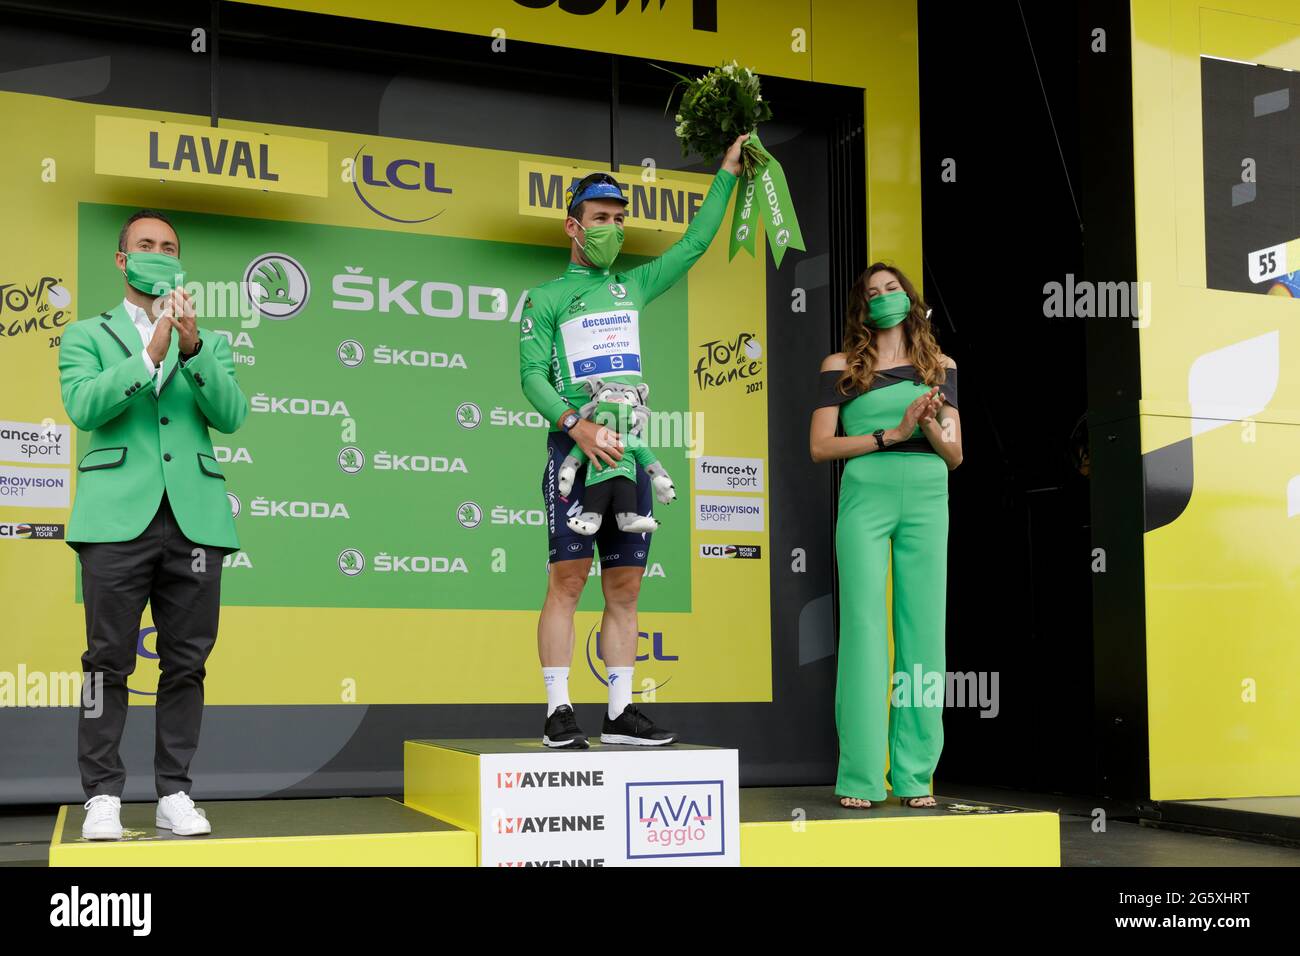 Laval, France. 30 June 2021. Mark Cavendish wearing the Maillot Vert or  Green Vest on the podium of the stage 5 time trial of the Tour de France  2021 cycle race in